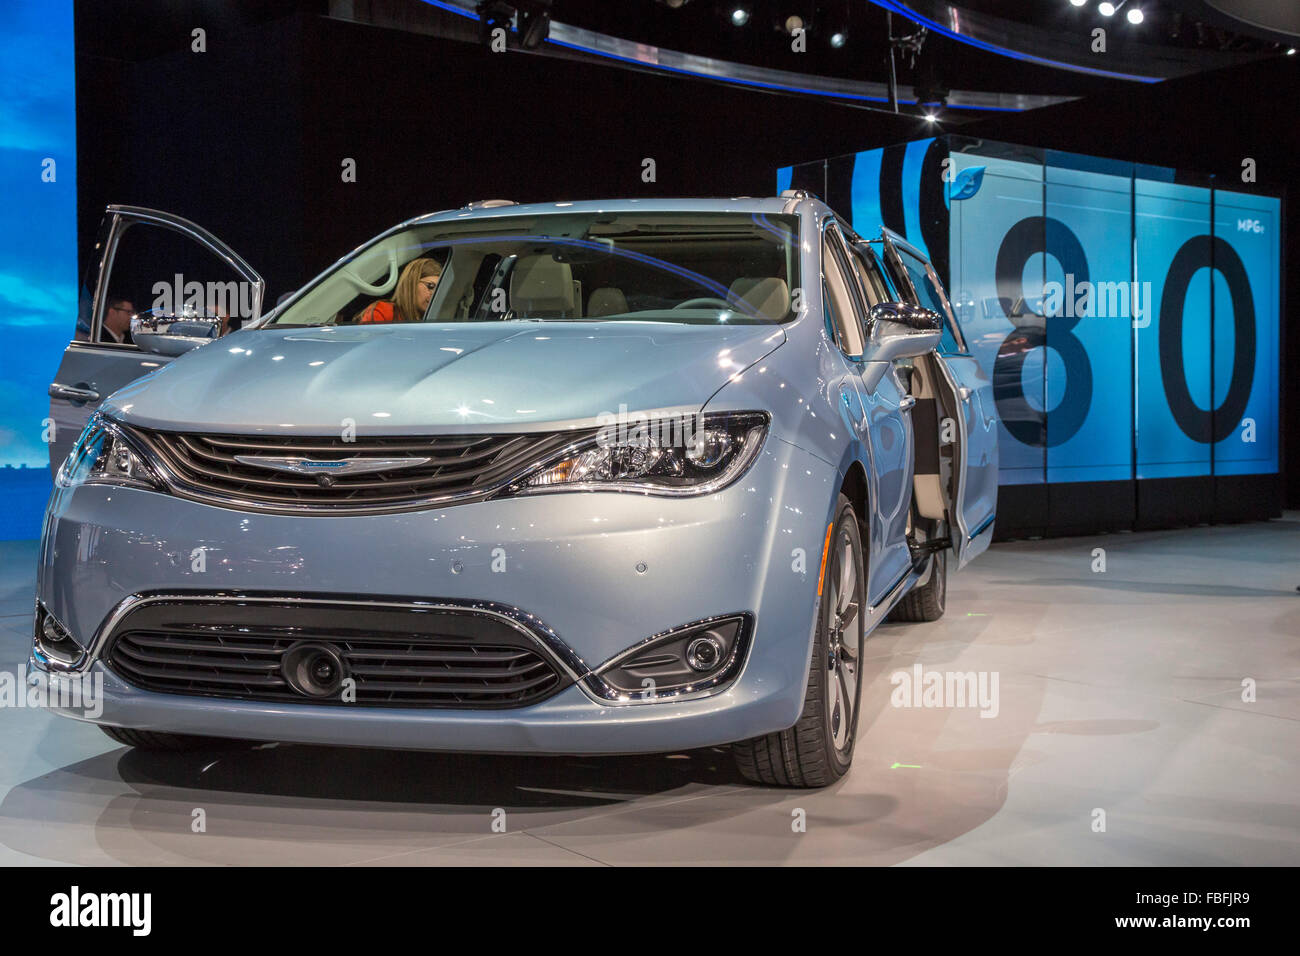 Detroit, Michigan - The 2017 Chrysler Pacifica hybrid gas-electric minivan on display at the Detroit auto show. Stock Photo